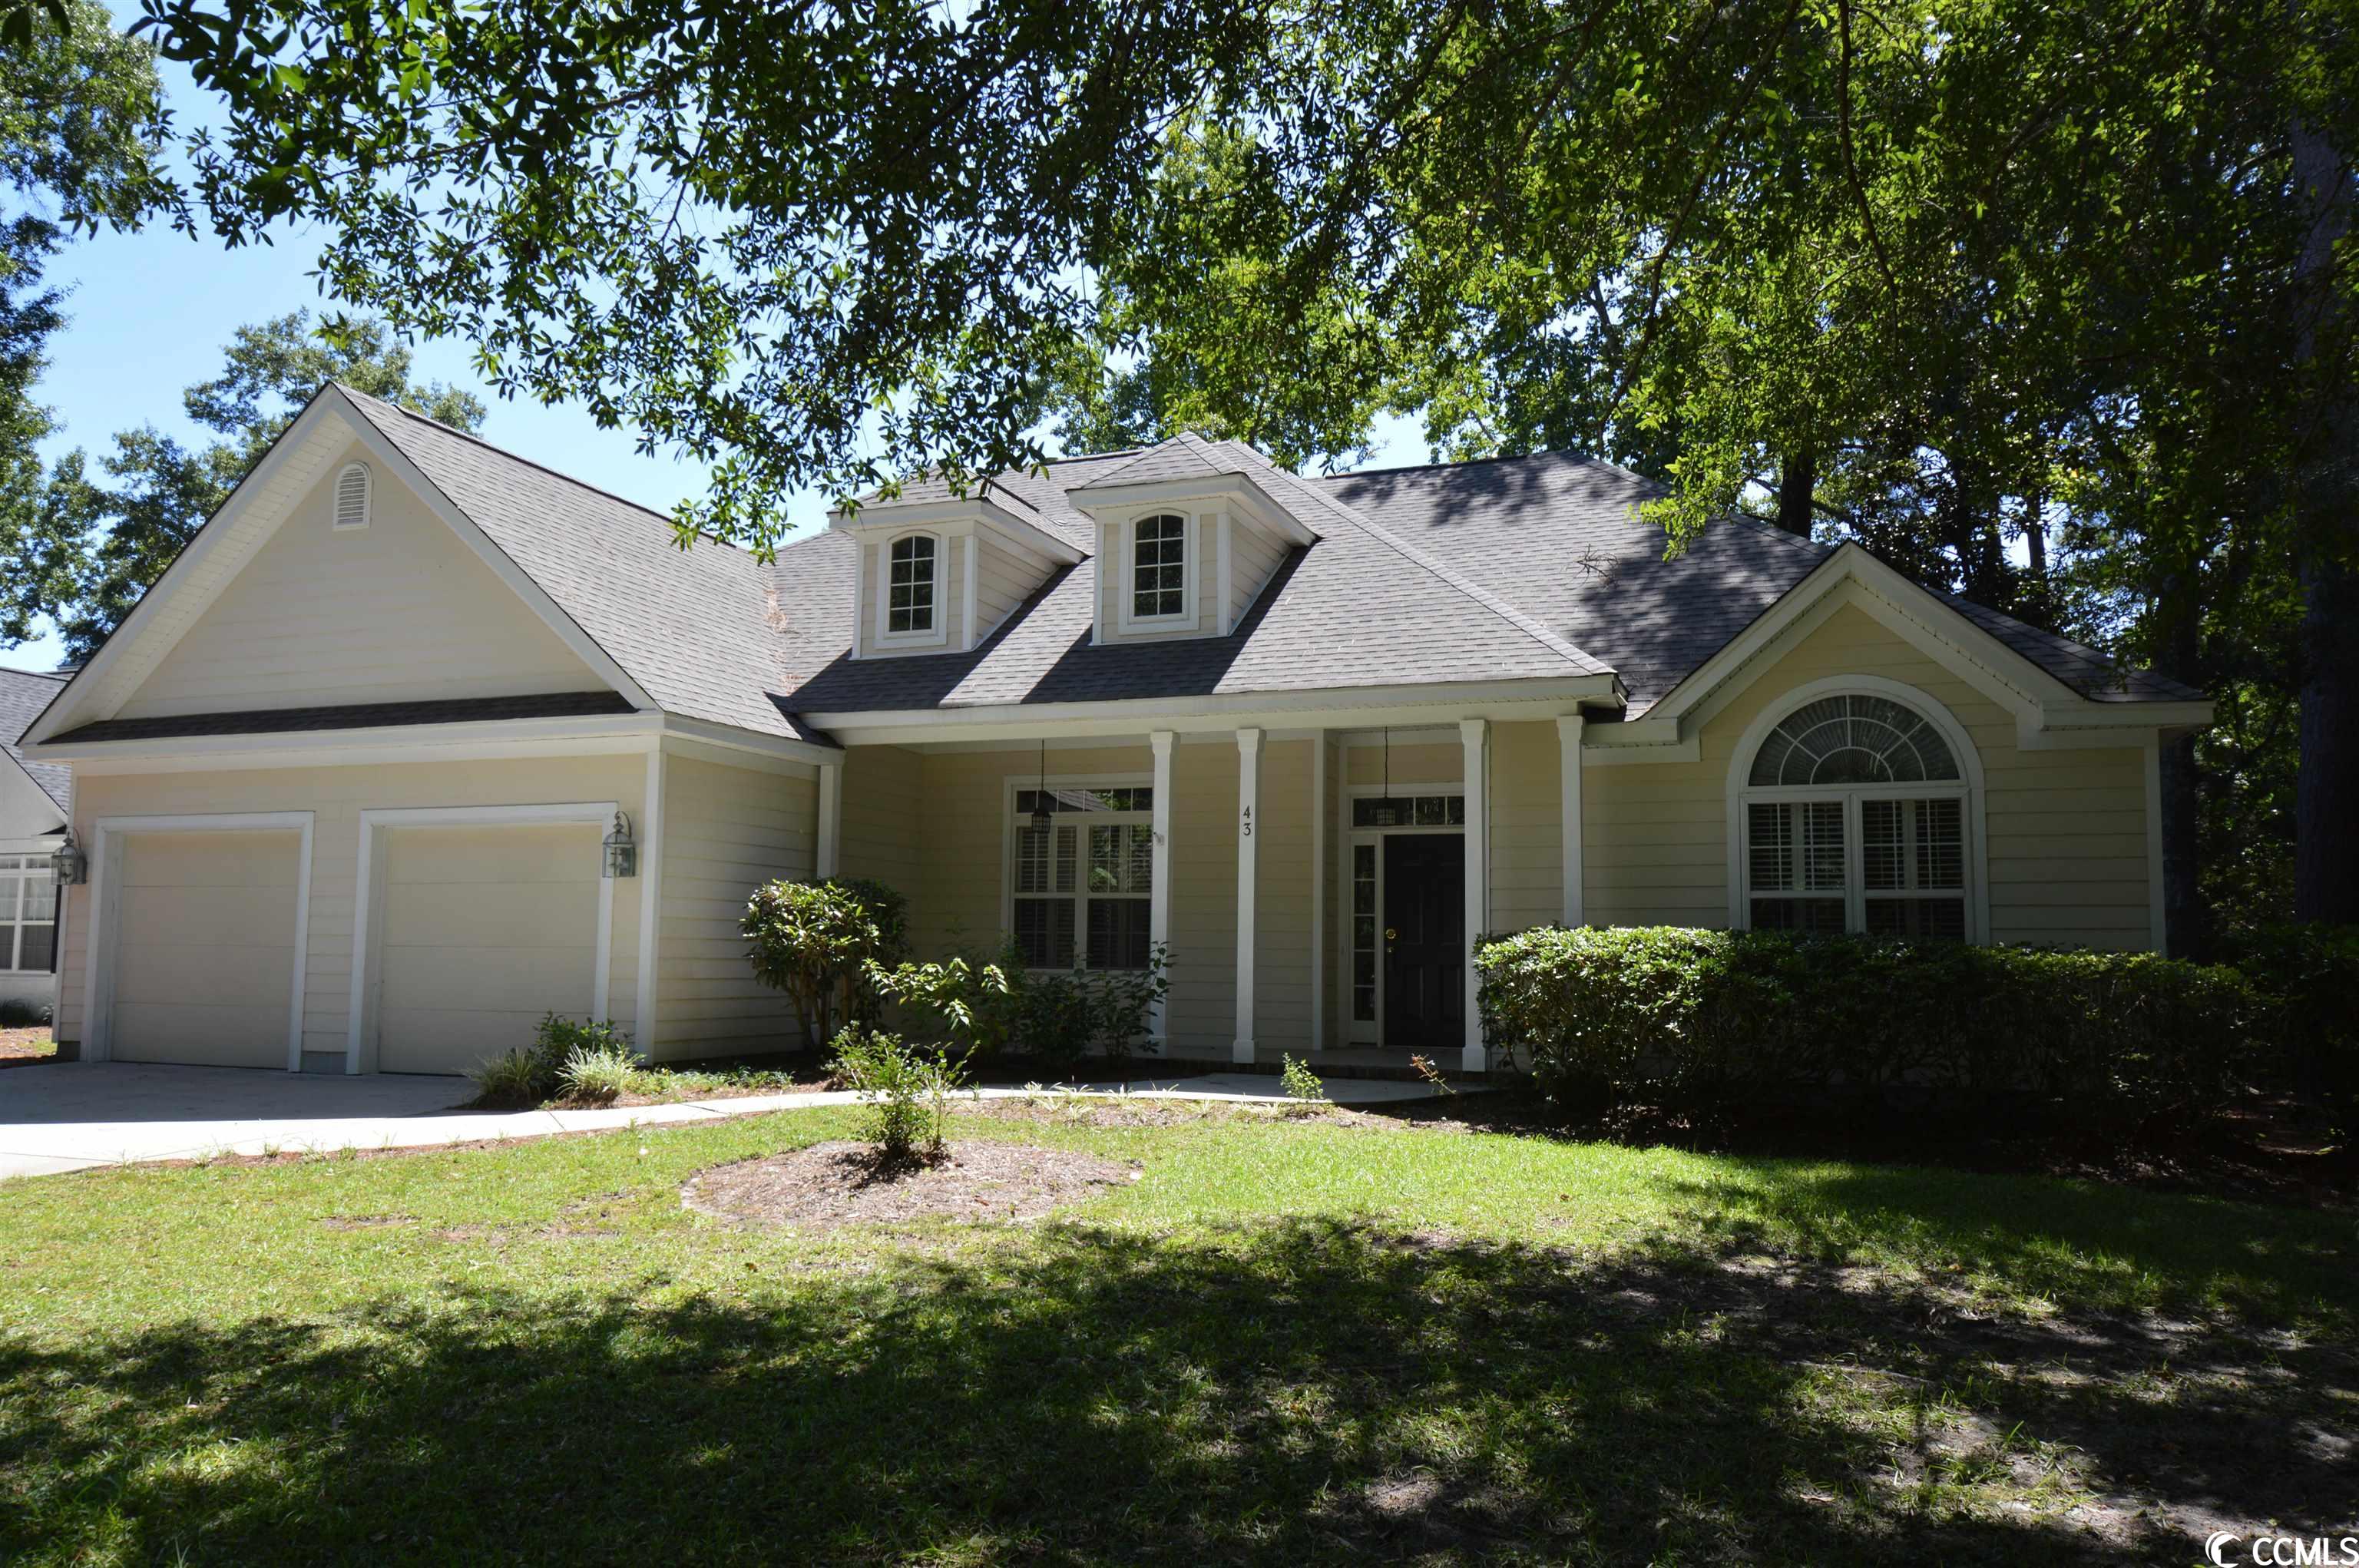 this is one of the most sought after neighborhoods in pawleys island. it simply feels like home. the community boasts a riverwalk with a boat ramp and landing, large community pool, close to schools, sidewalks, friendly neighbors and low poa!!  this home is situated on a cul de sac with mature landscaping (especially the large azaleas) the rear deck overlooks the pond with a fenced in yard. features include vaulted ceilings, open and split floorplan, gas fireplace, single level living, front porch, separate laundry, neutral colors, huge owners bathroom with two walk in closets and plantation shutters. new granite just installed, new roof in december of 2021, new hwh in 2023.